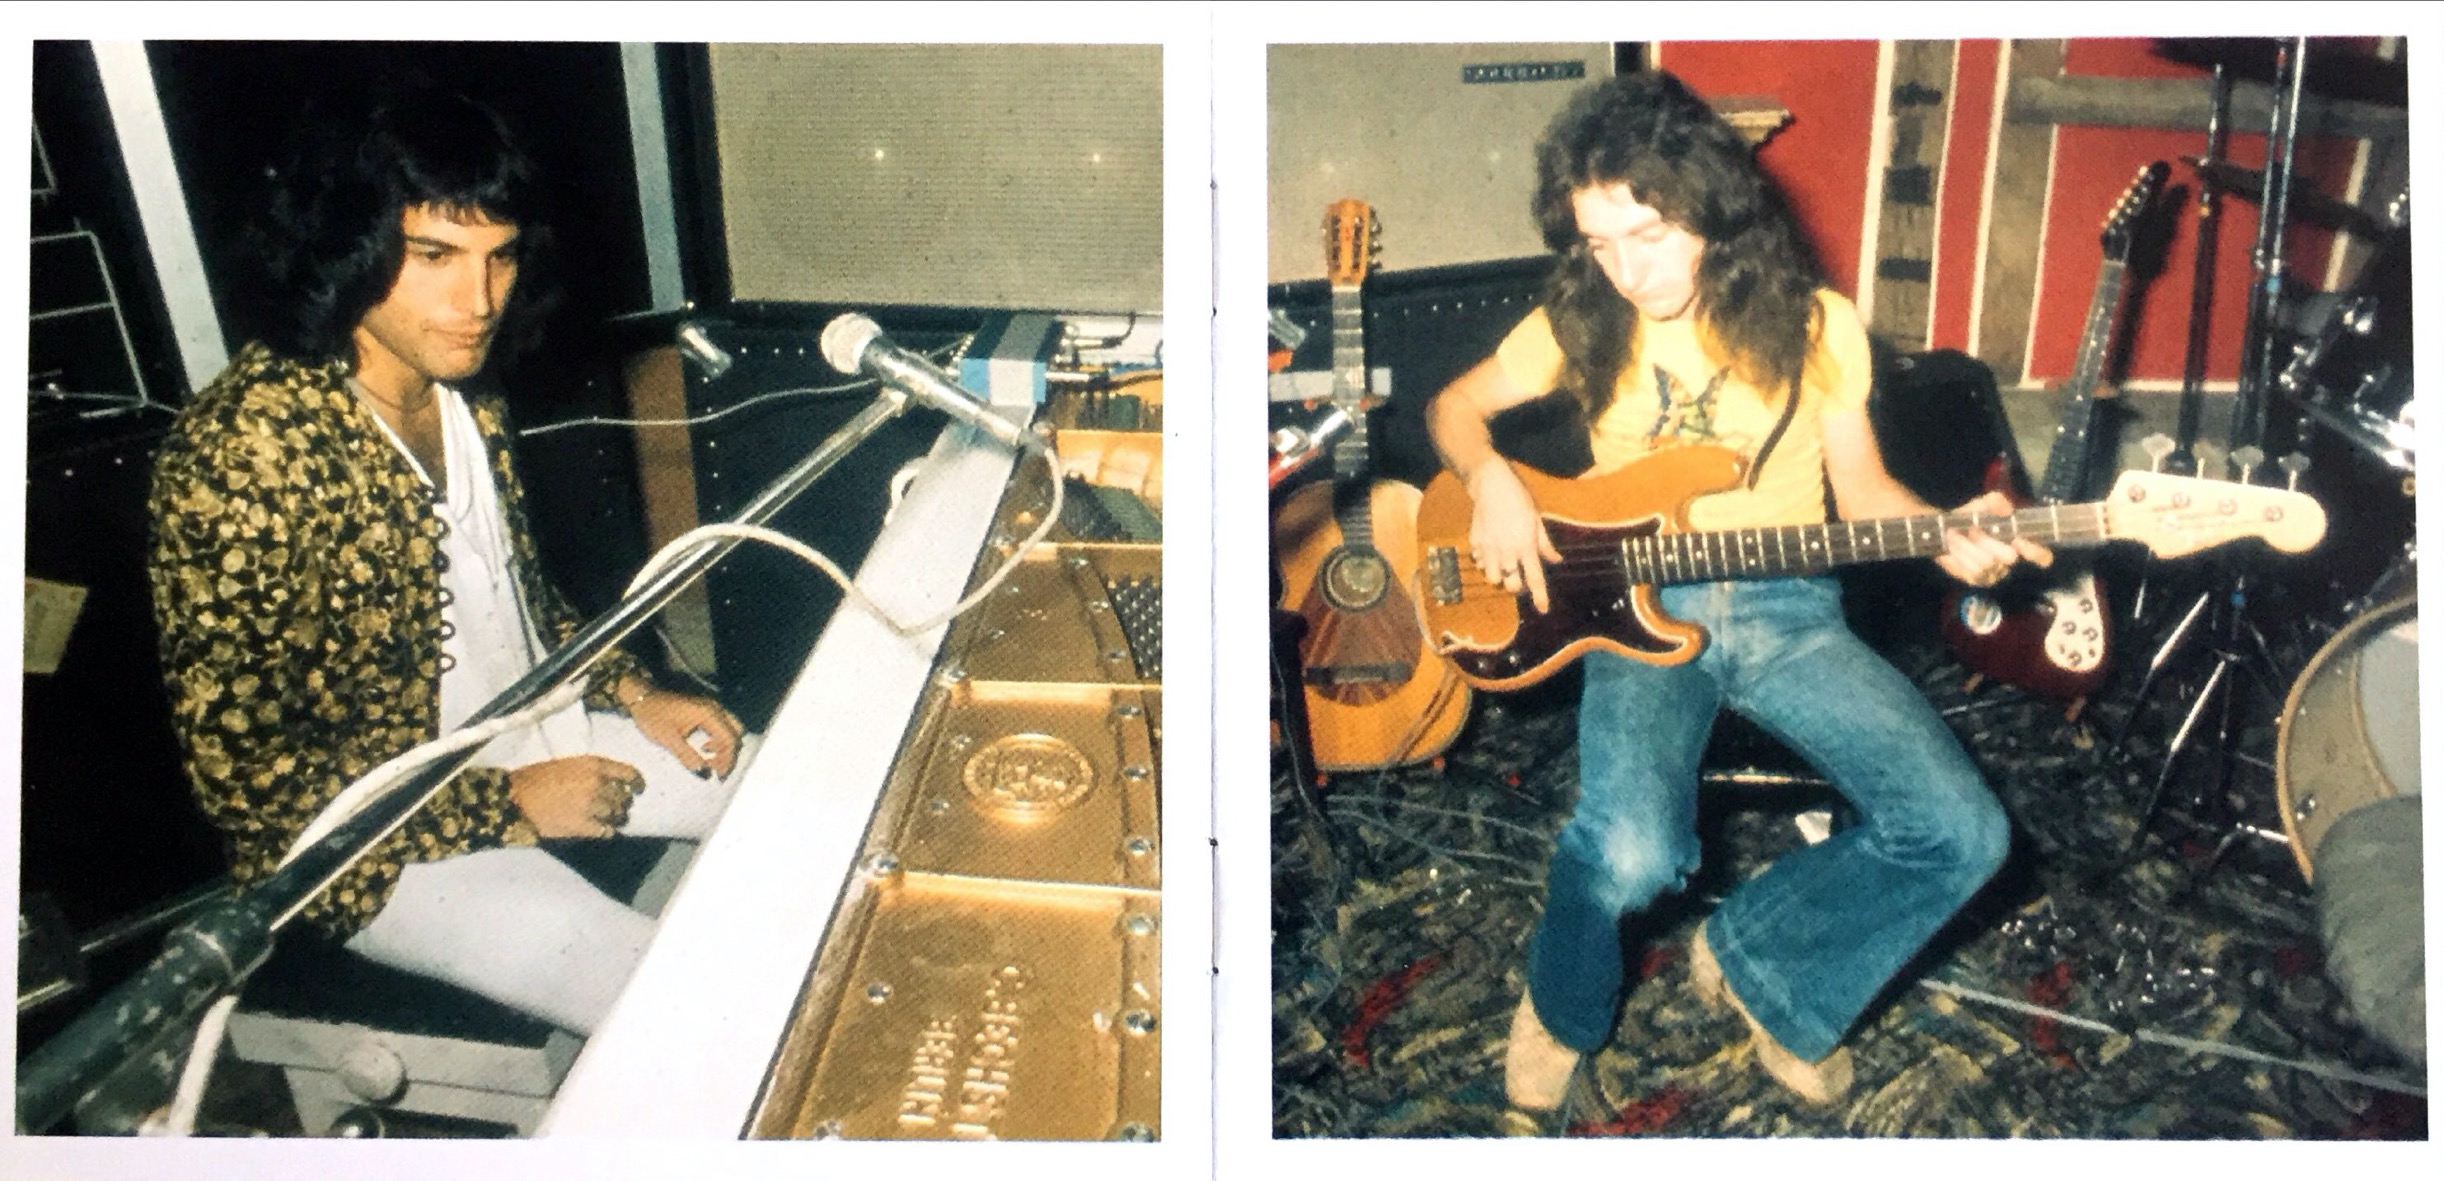 A 2-page spread from the Night At The Opera CD booklet, one photo on each page. On the left, Freddie Mercury sits in front of a microphone, wearing a leafy-patterned jacket over a white shirt and white trousers. On the right, John Deacon sits playing the bass guitar, wearing a yellow t-shirt and blue jeans